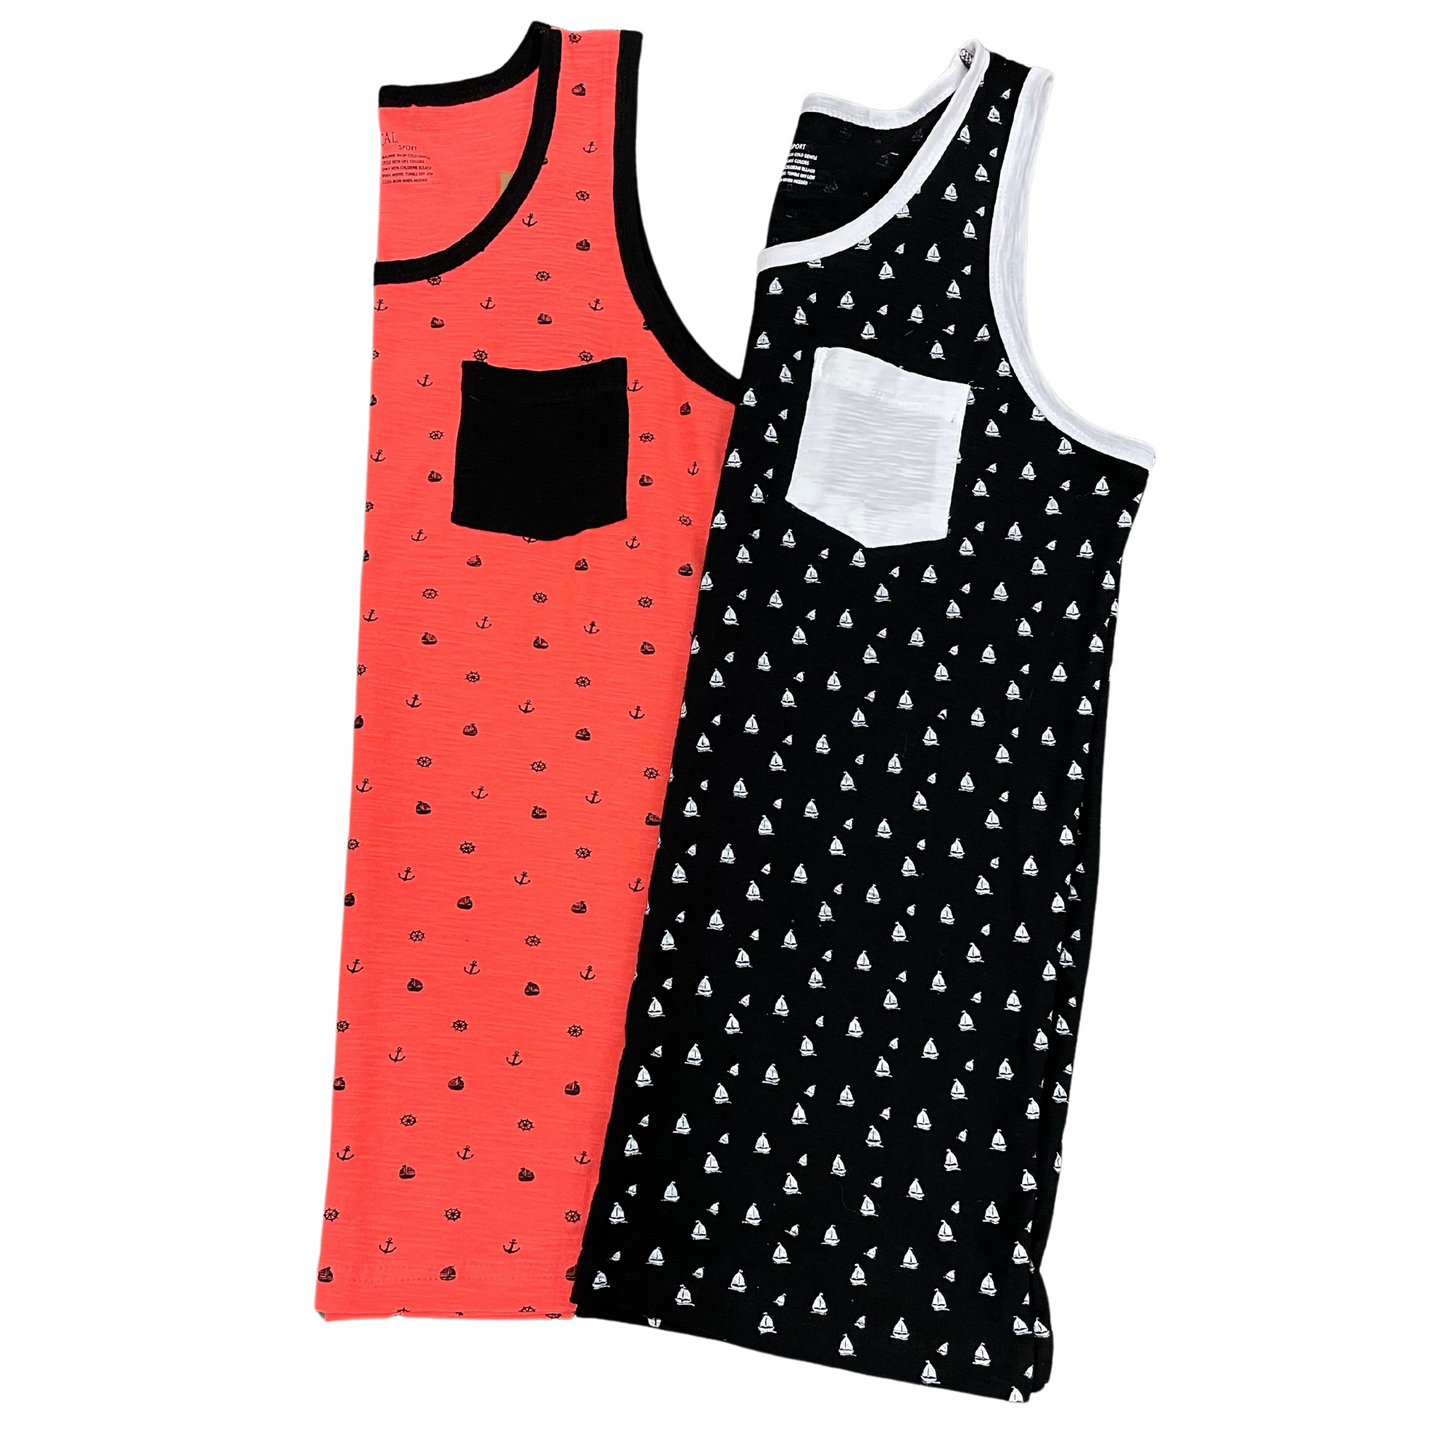 Vertical Sport Tank Black or Coral (S-2XL)